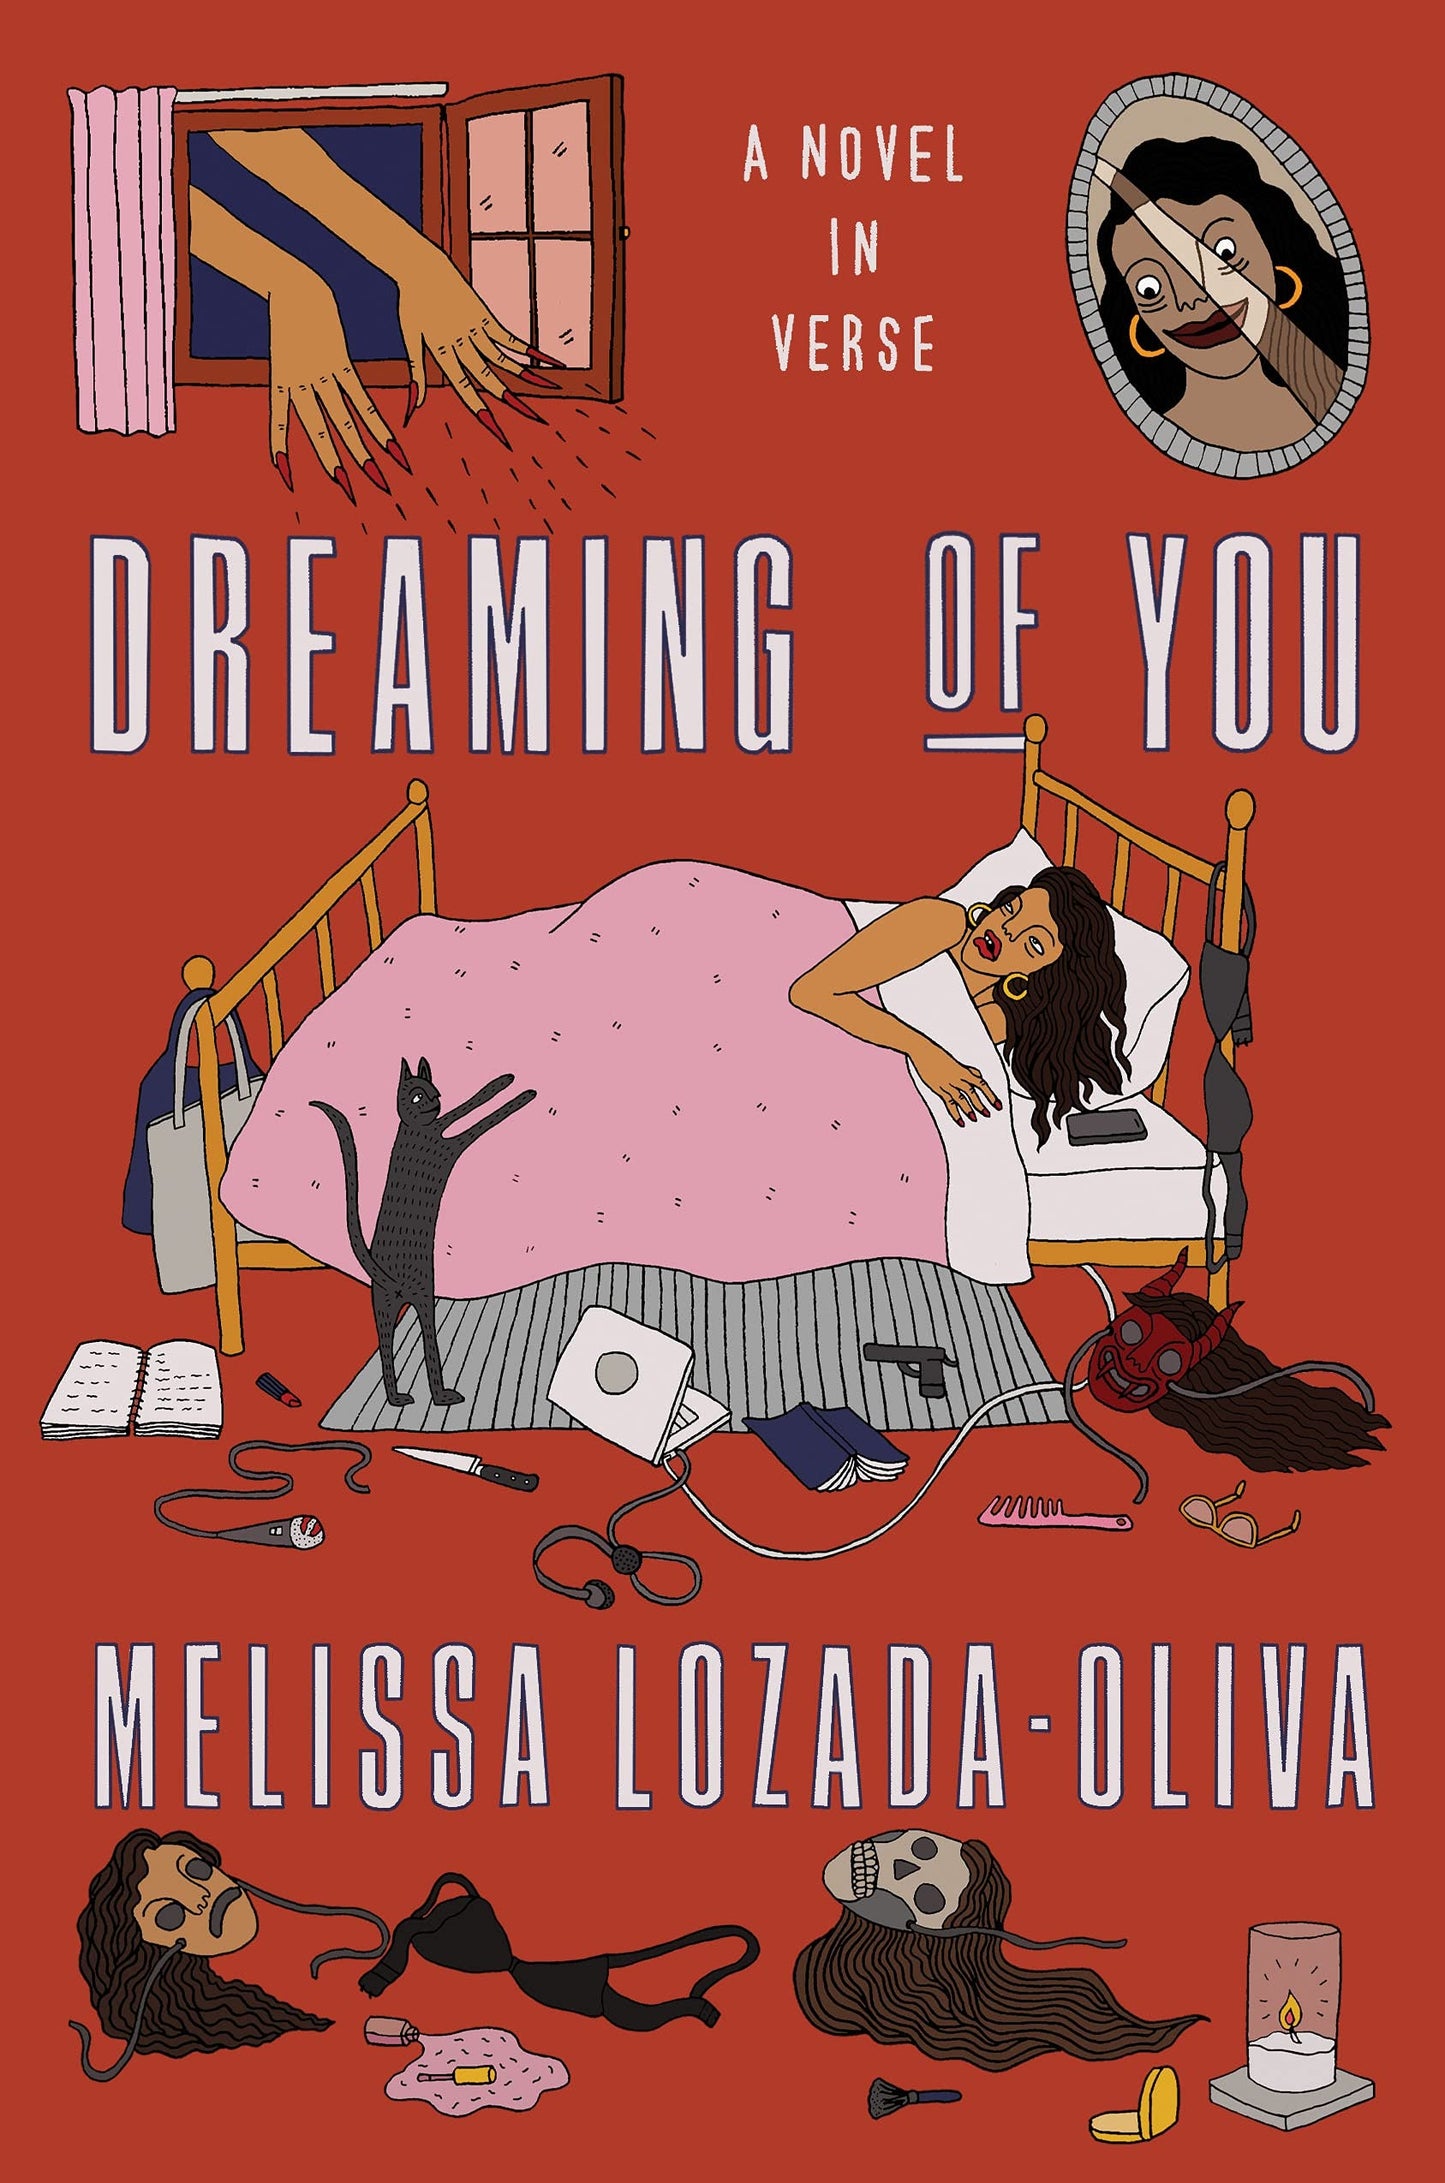 Dreaming of You // A Novel in Verse